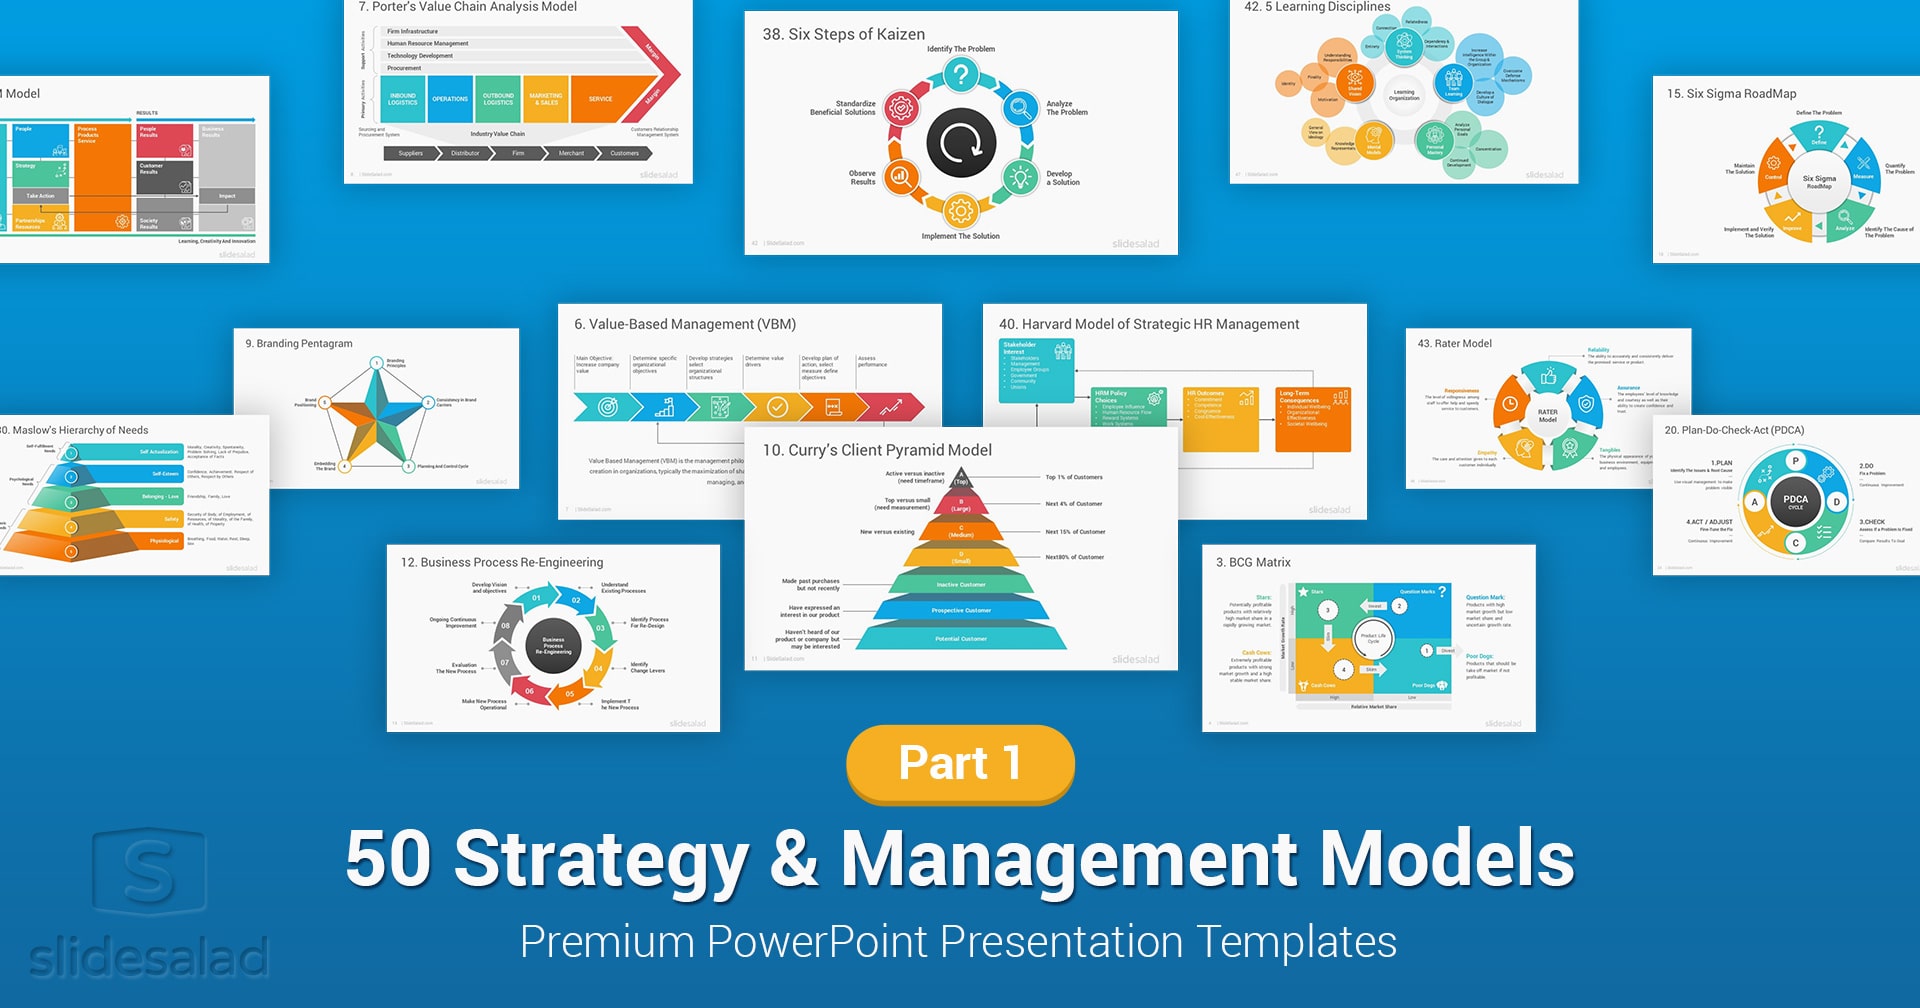 Strategy and Management Models PowerPoint Templates Part 1 - Bundled PowerPoint Template